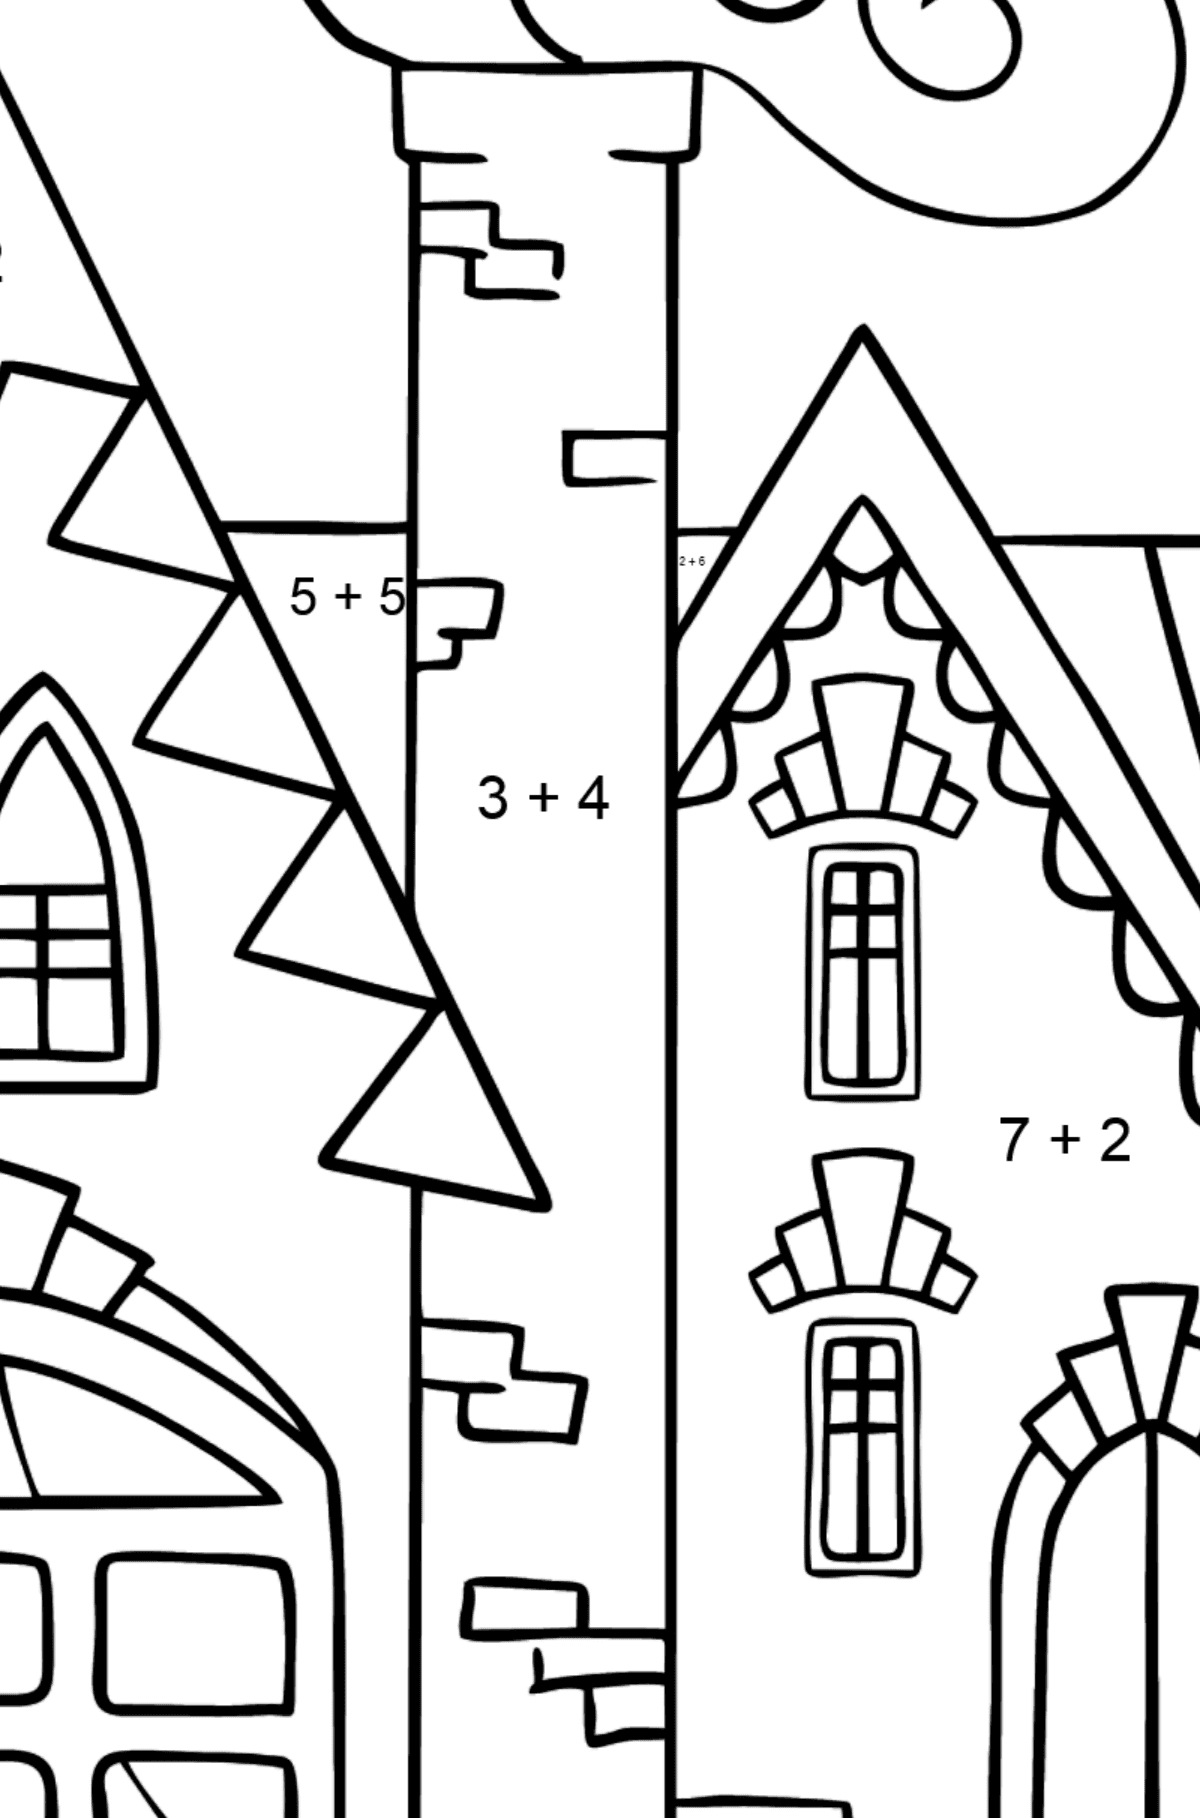 Simple Coloring Page - A Charming House - Math Coloring - Addition for Kids